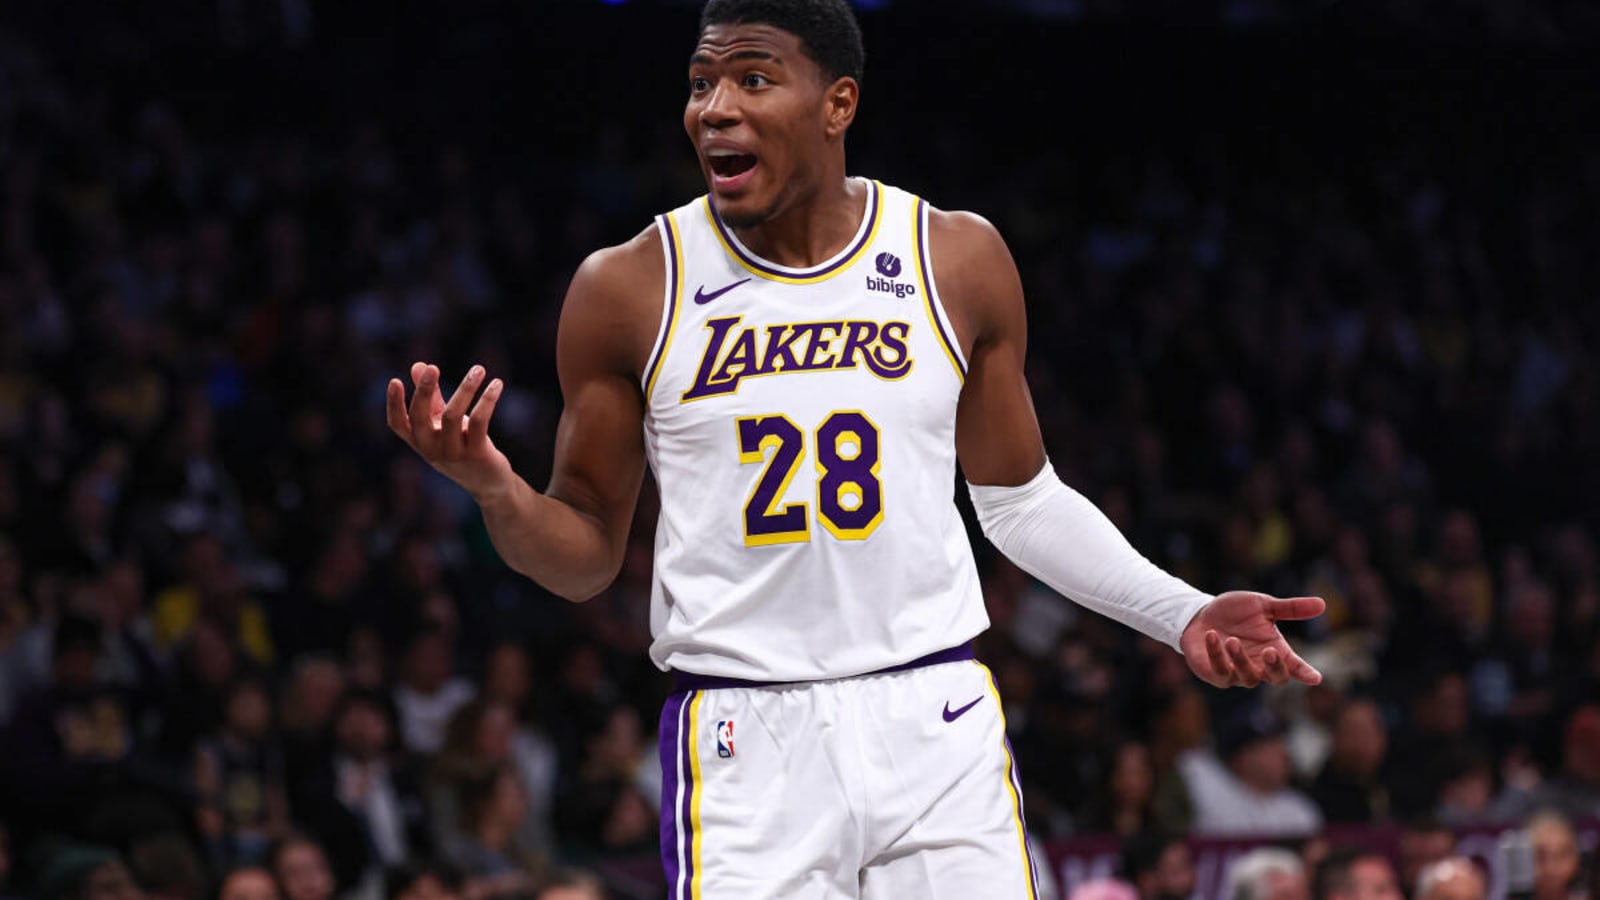 Shannon Sharpe Calls Out Rui Hachimura After 3-Point Performance In Game 2 Loss